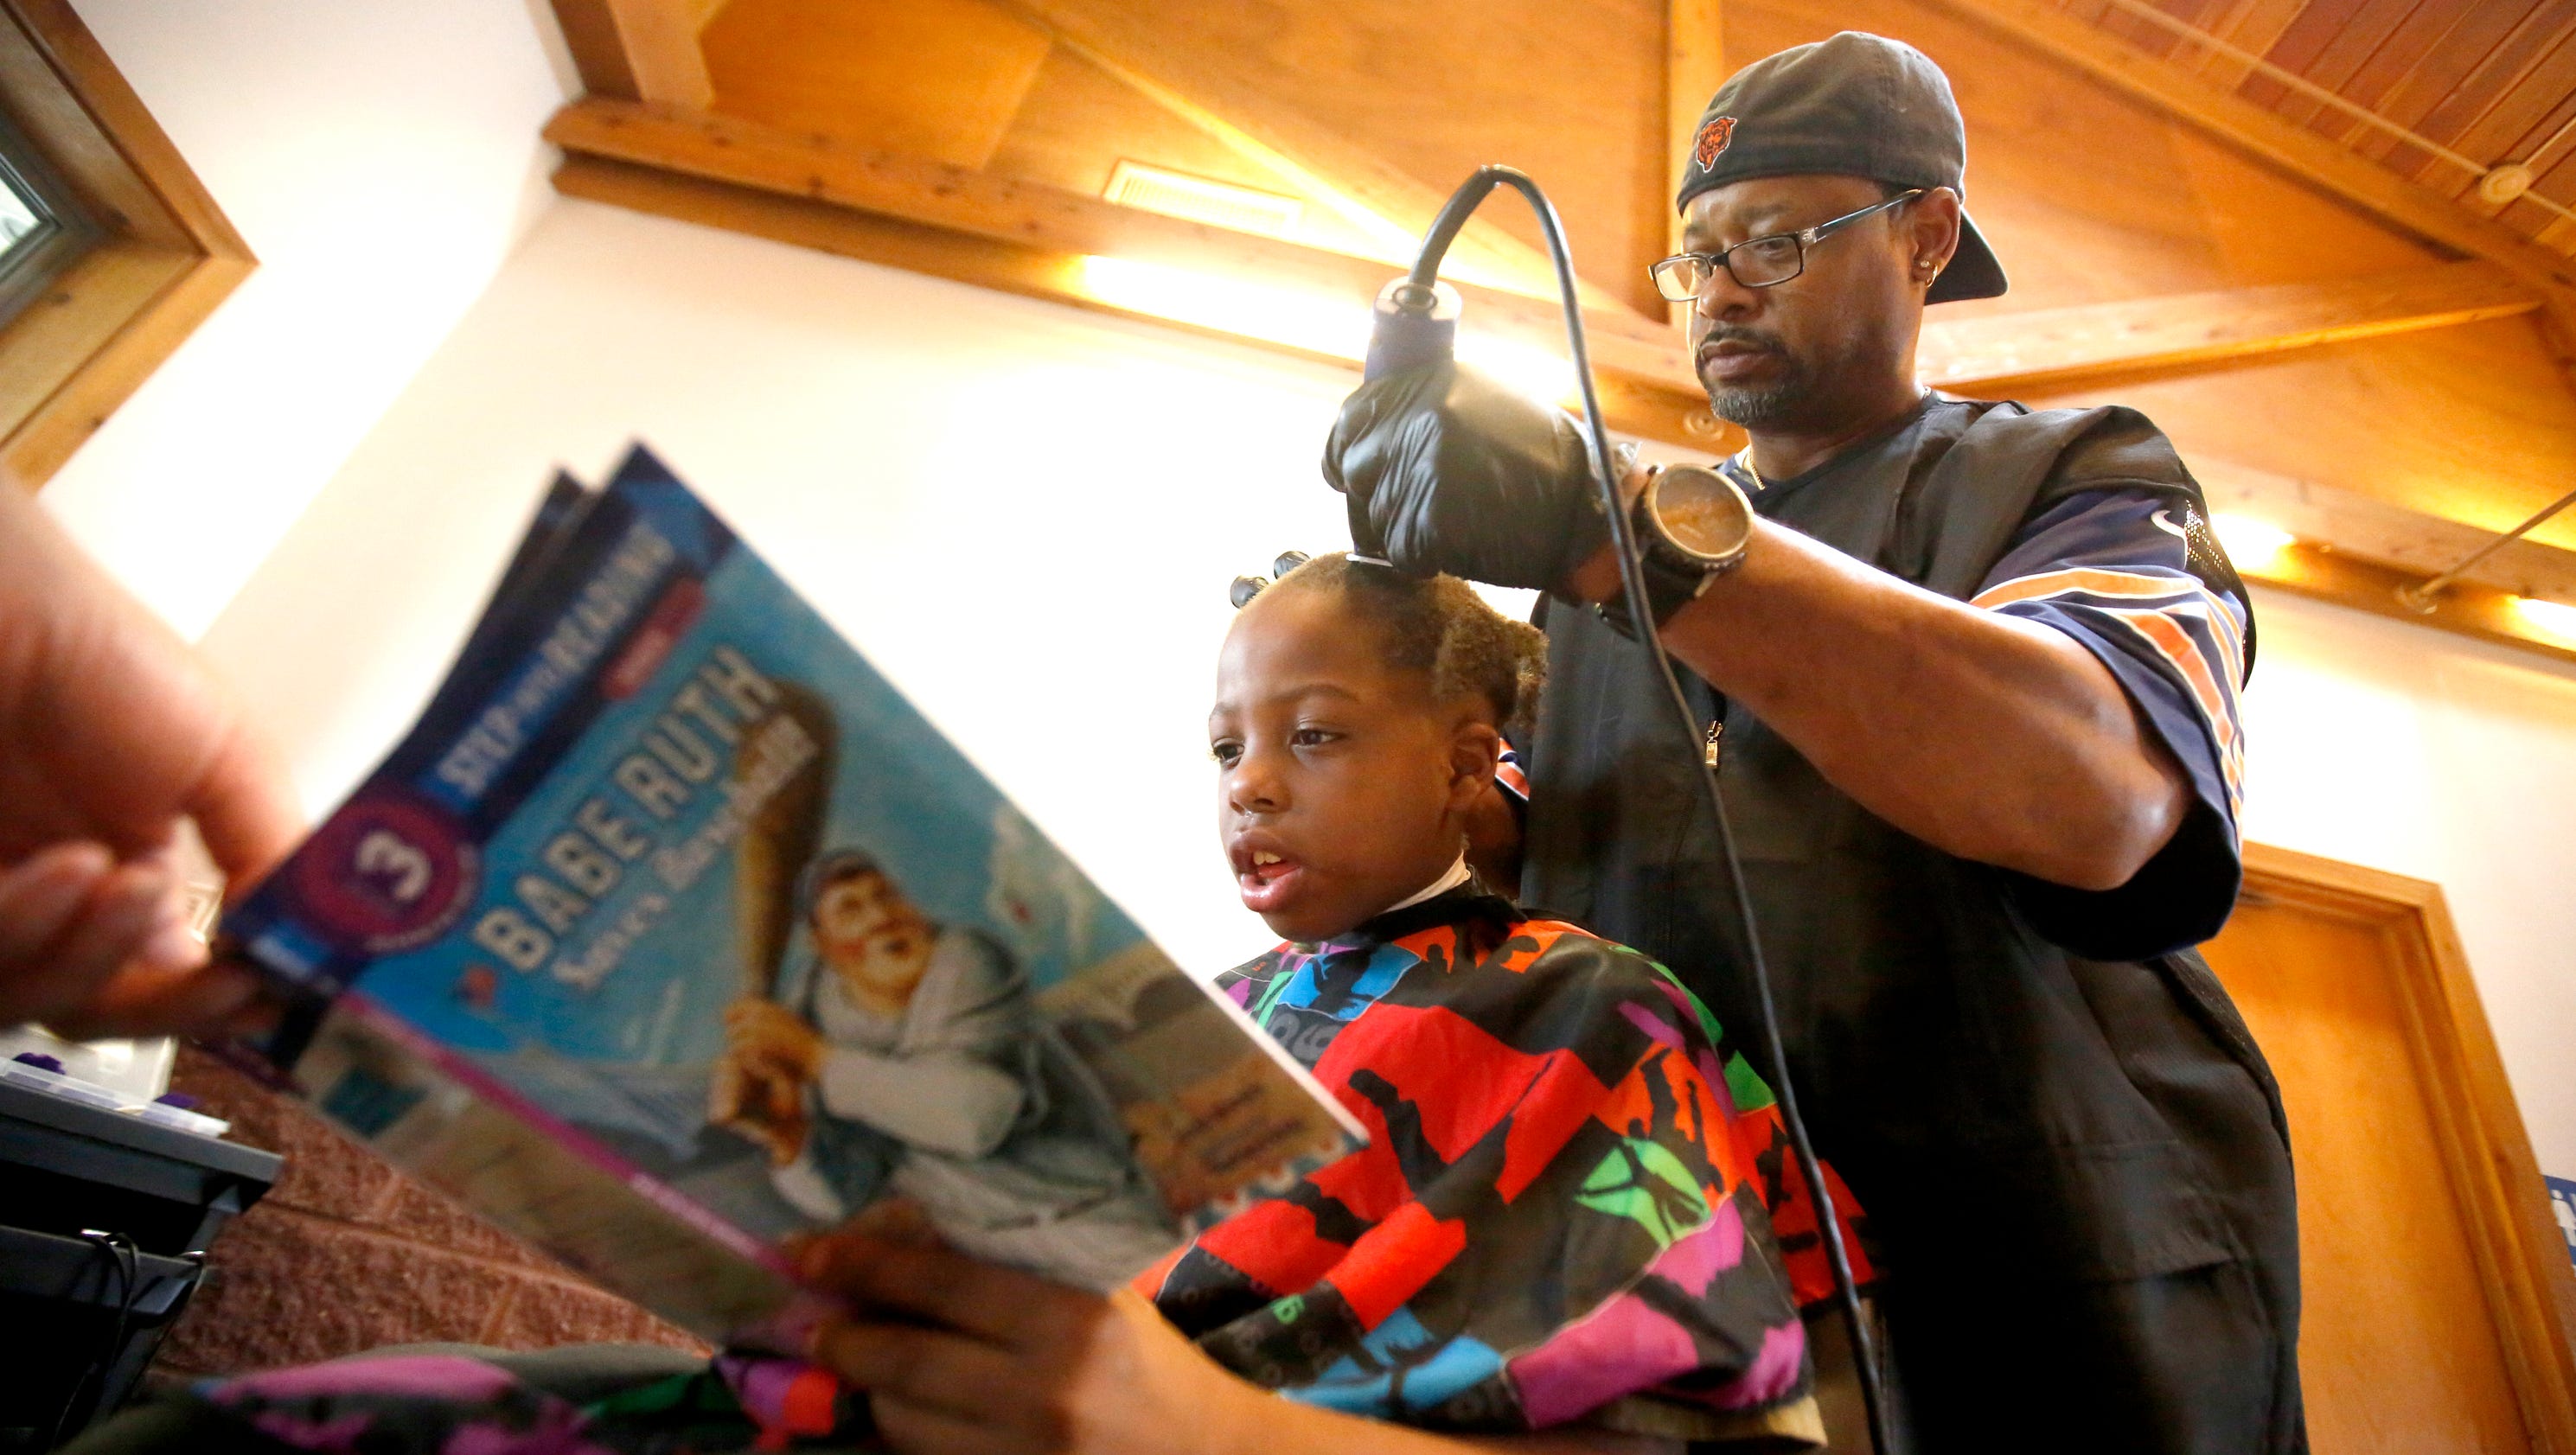 Iowa barber's deal for kids: Read for haircut